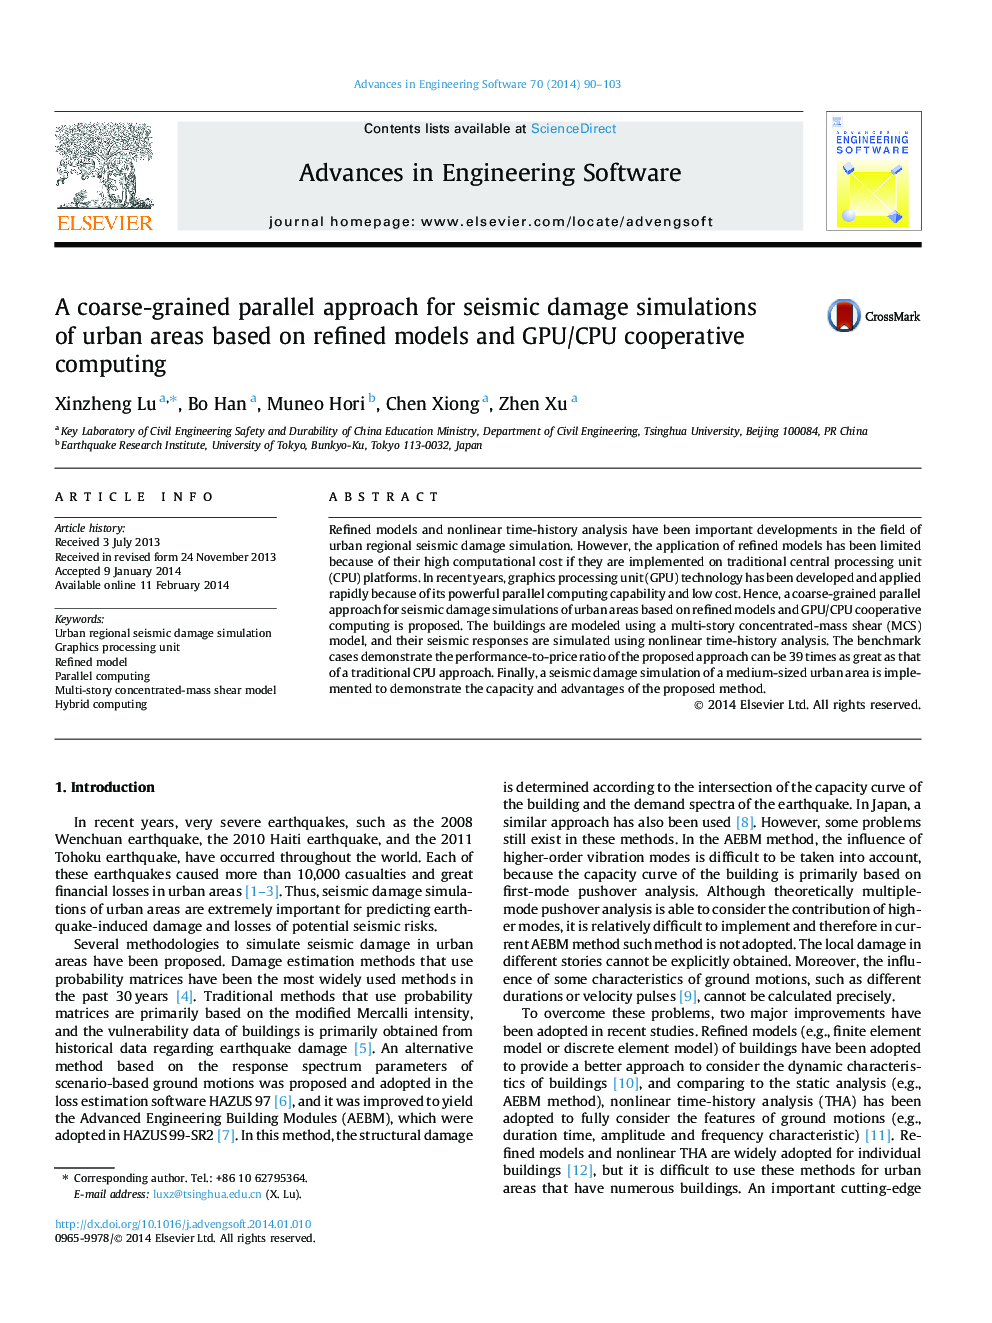 A coarse-grained parallel approach for seismic damage simulations of urban areas based on refined models and GPU/CPU cooperative computing